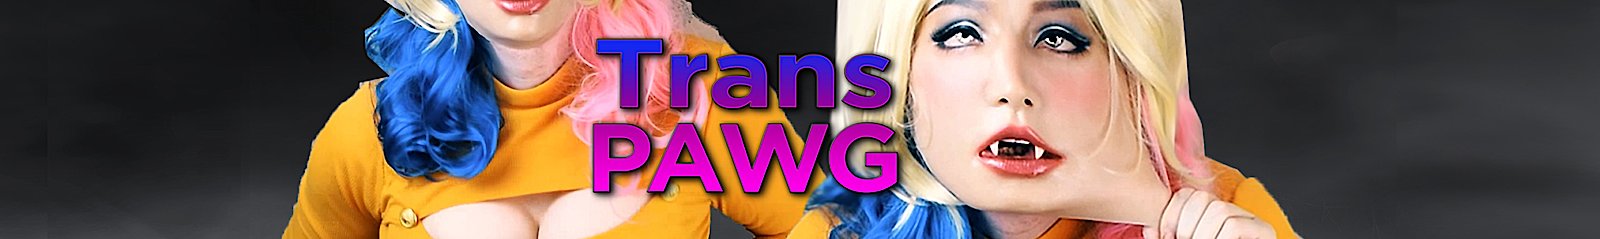 Trans Pawg